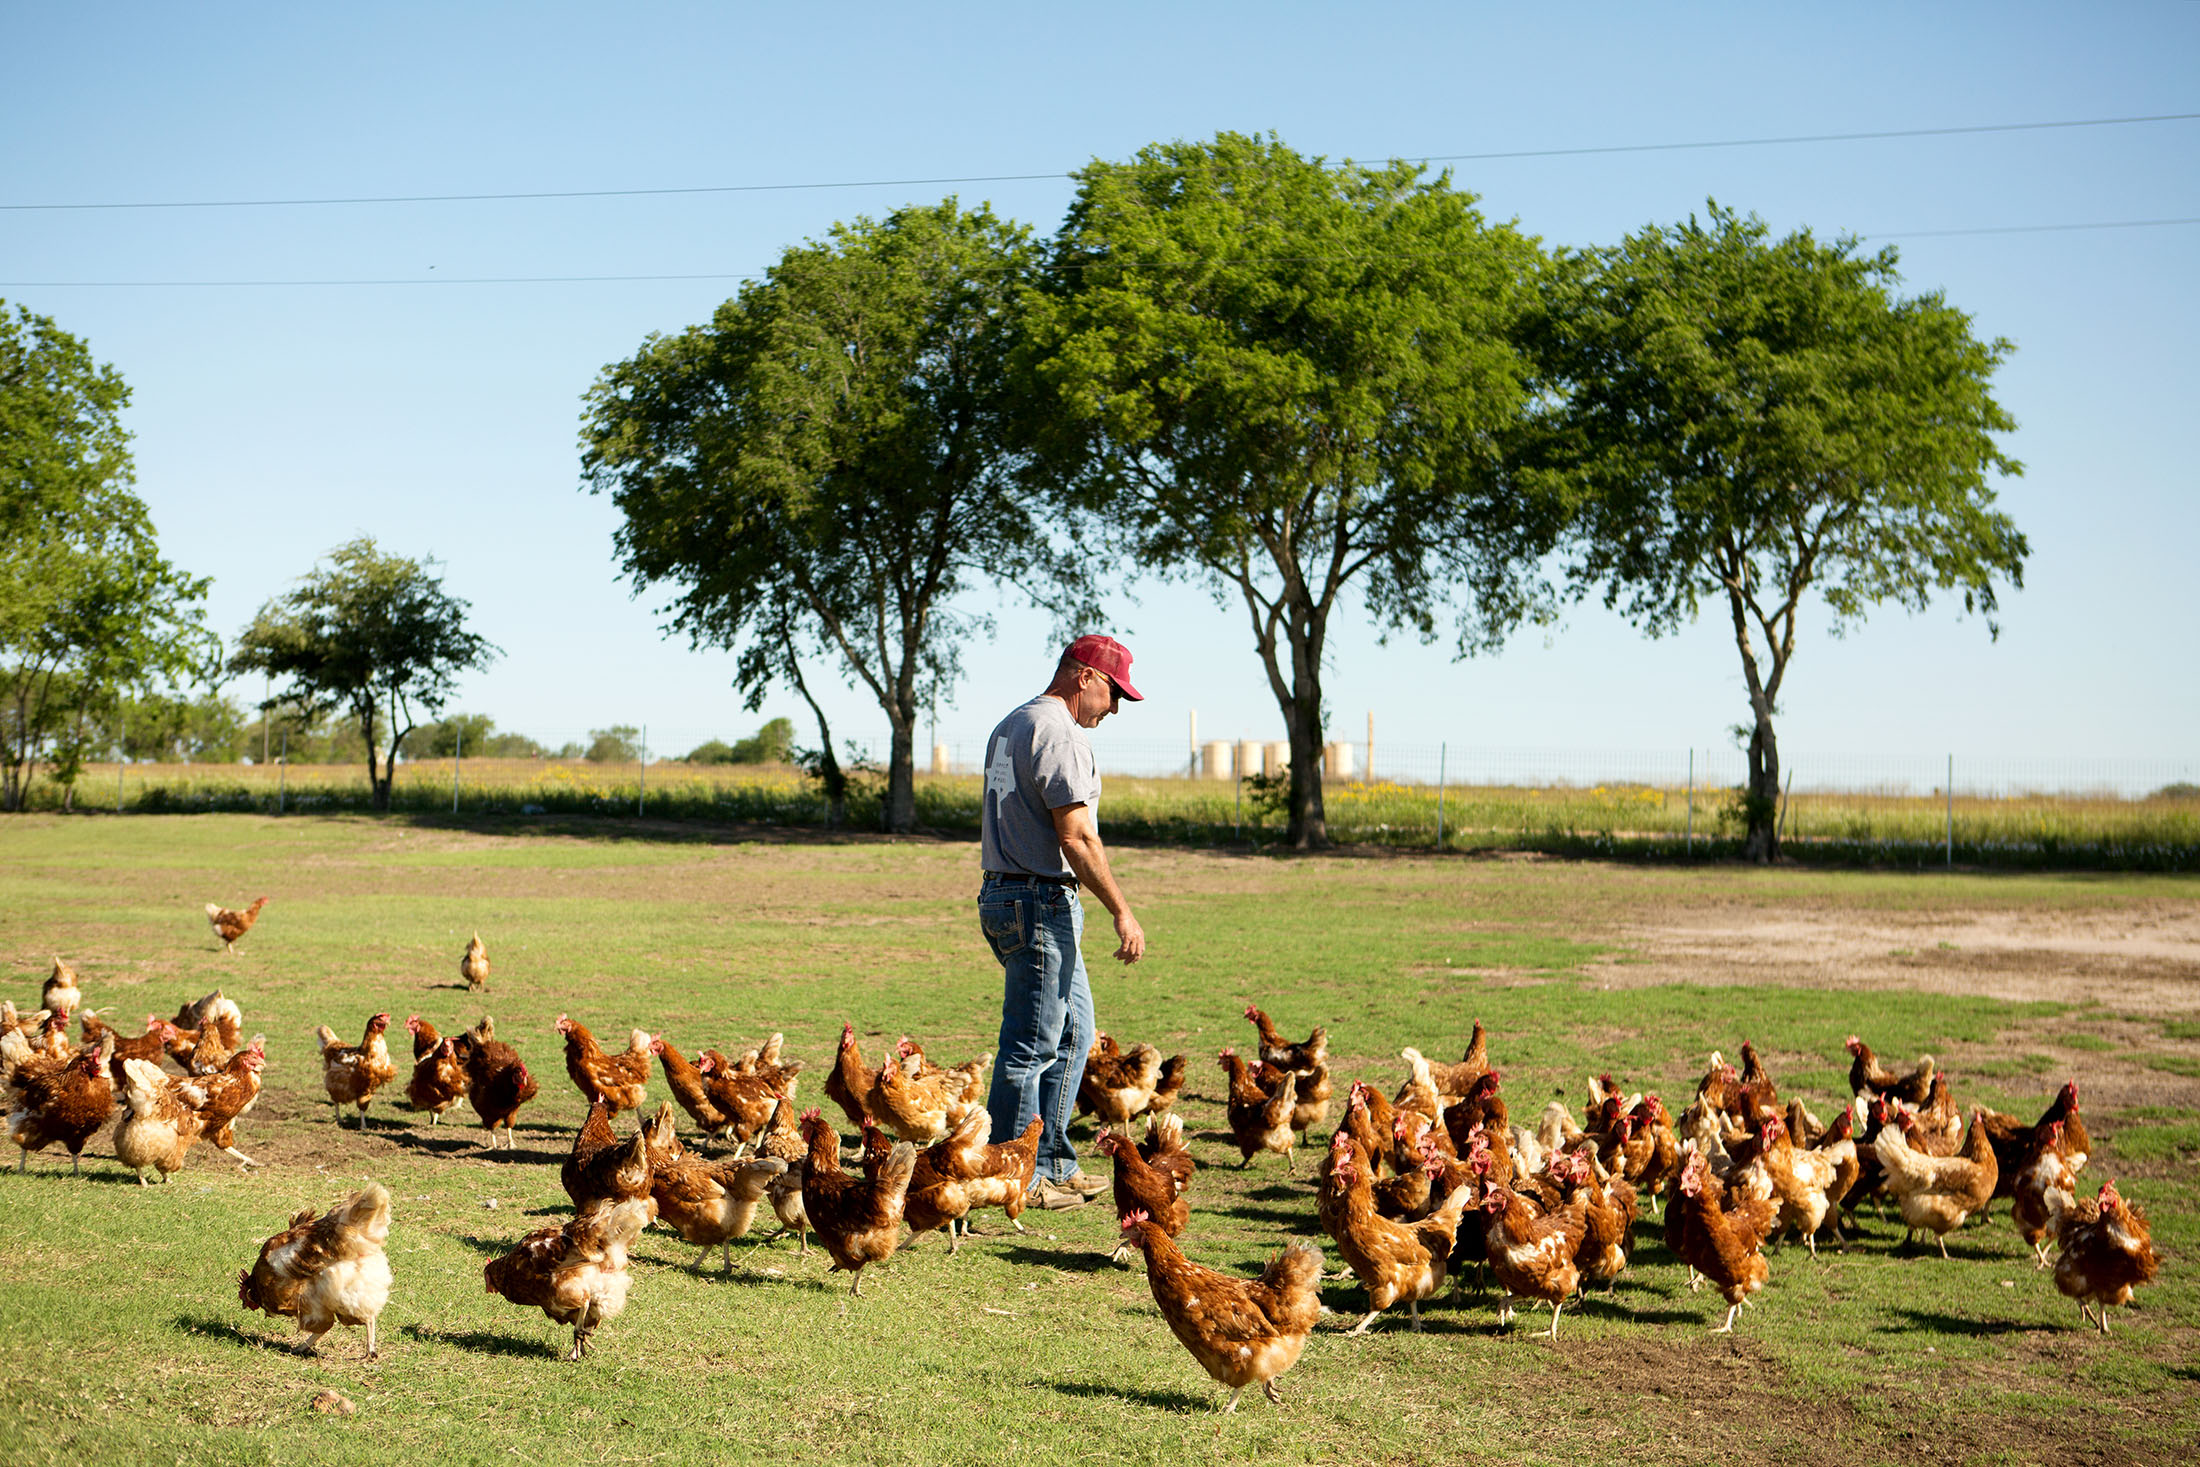 II. The Benefits of Hens in Sustainable Farming Practices